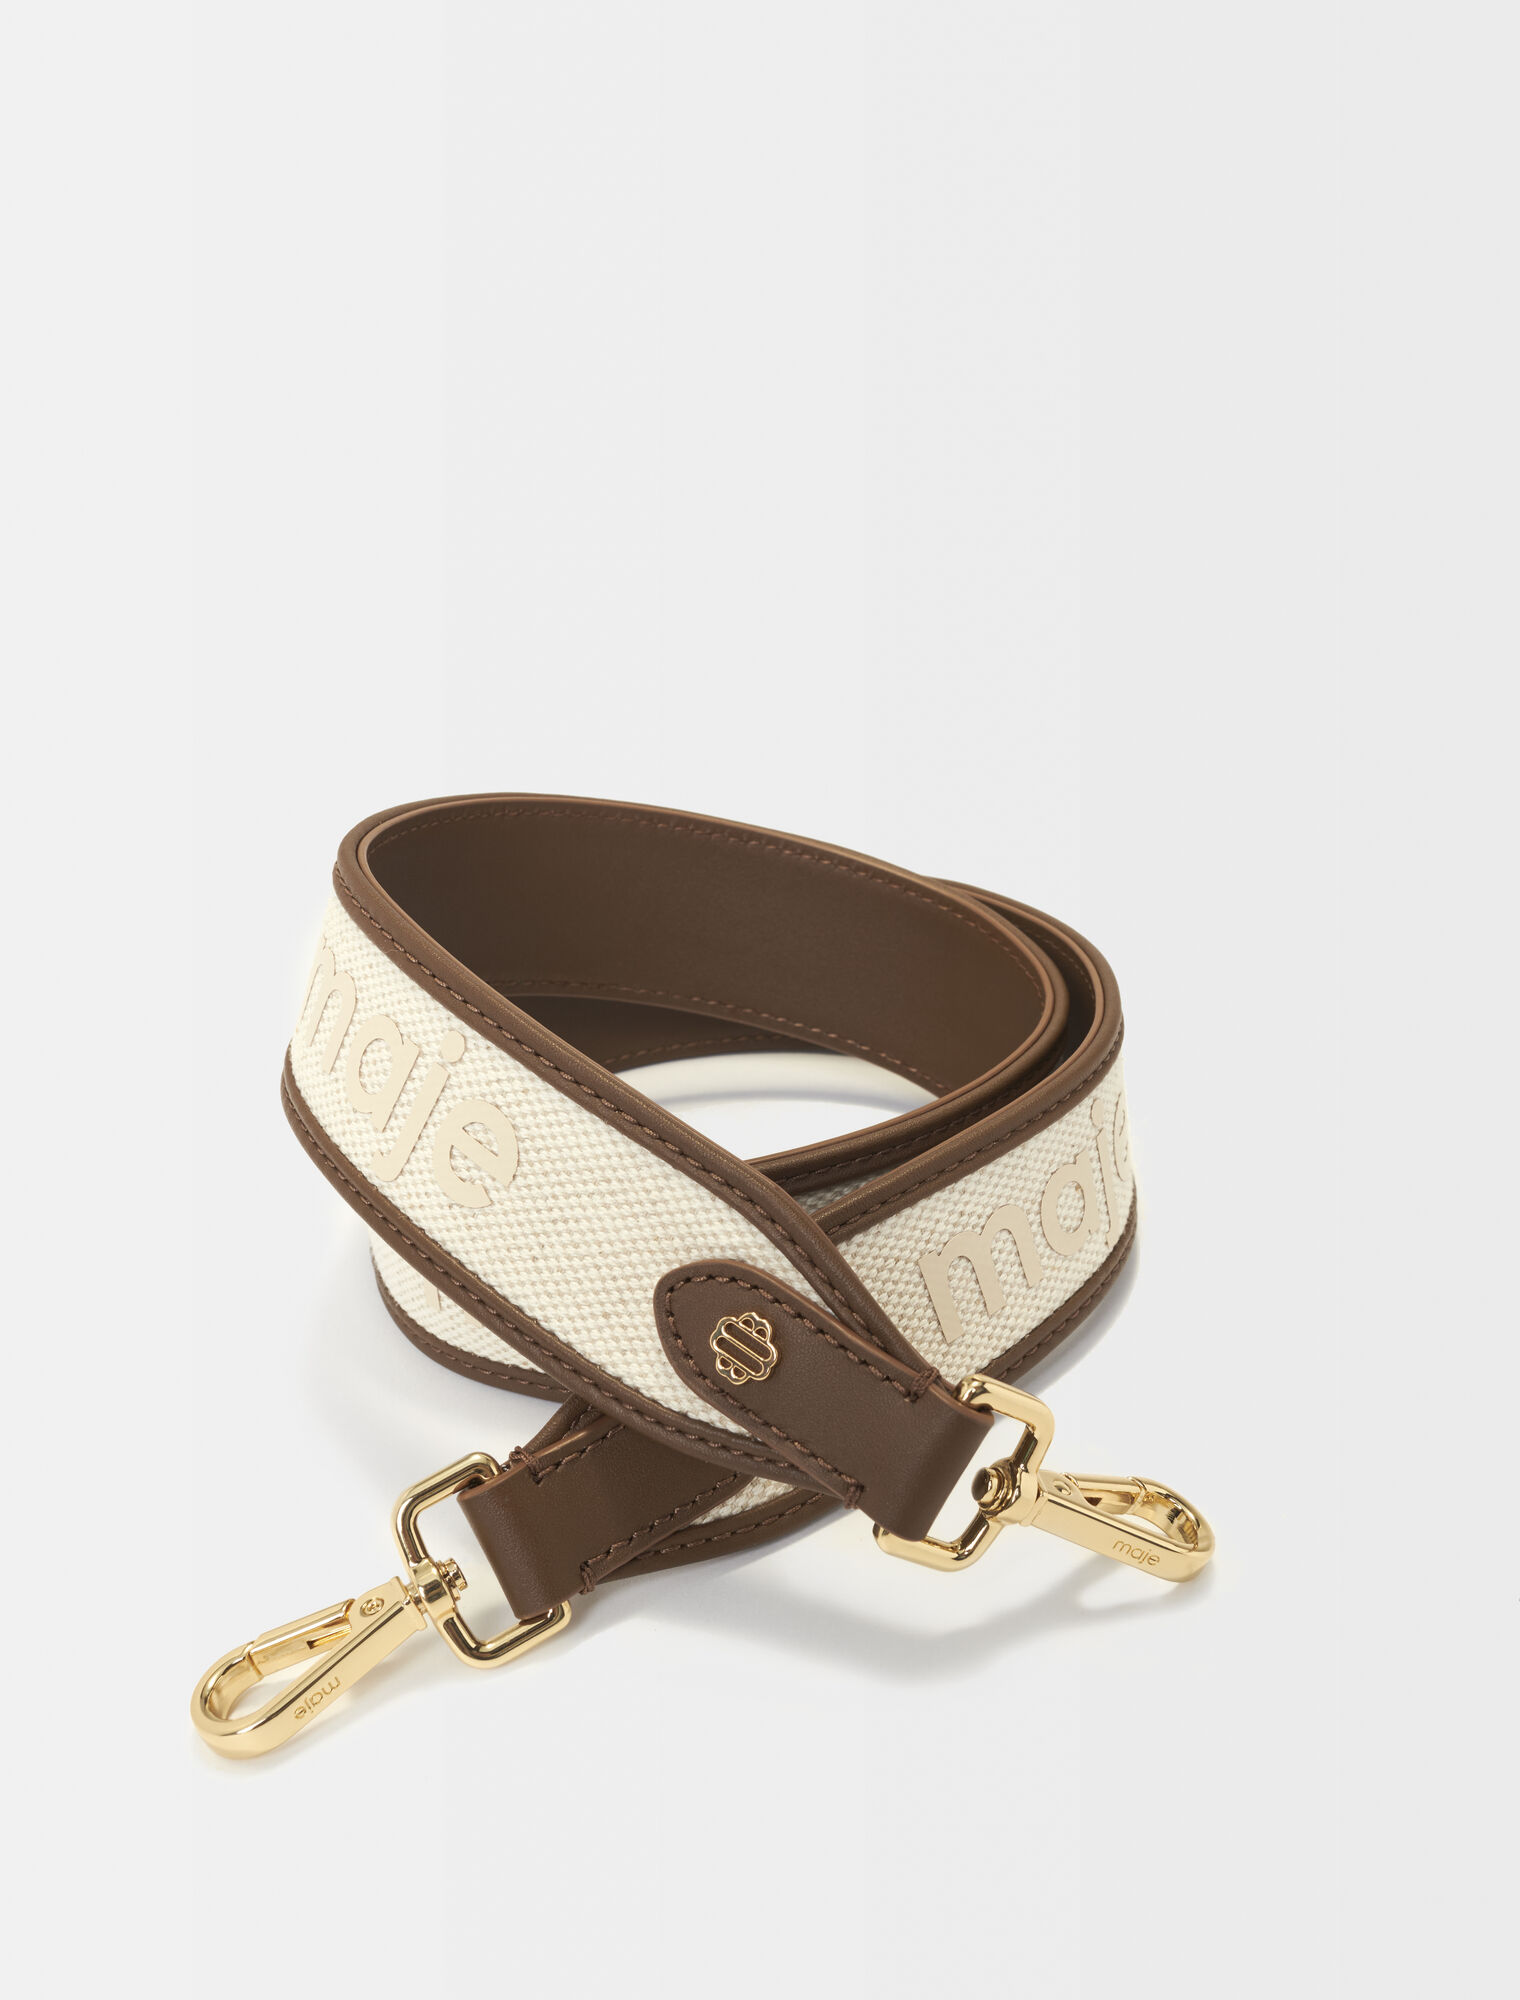 Leather and material mix shoulder strap